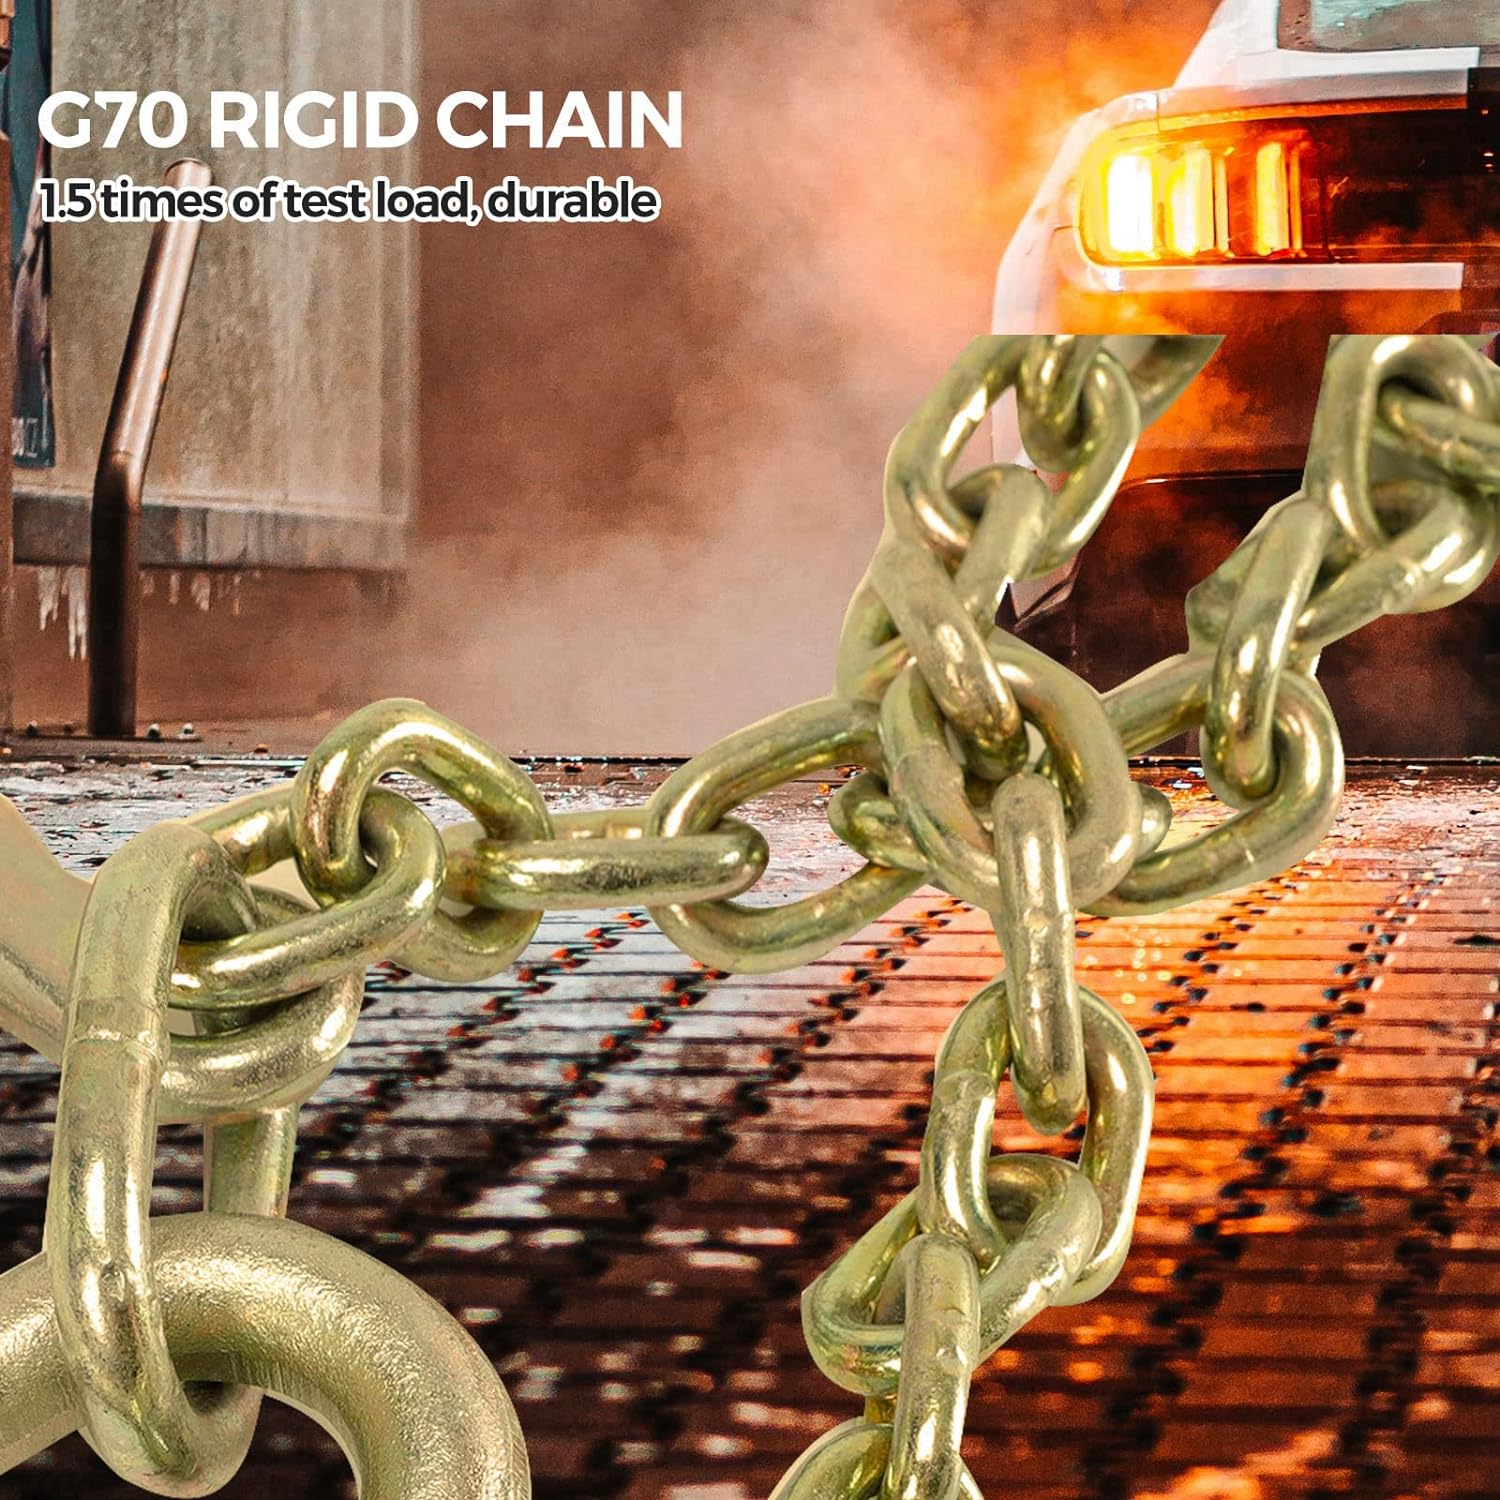 Gooeap 3/8" X 2' V-Type Tow Chain with 15 Inch J-Hooks Link 2 inch Legs,G70 Steel Towing Chain Bridle,Yellow Zinc Plated Tractor